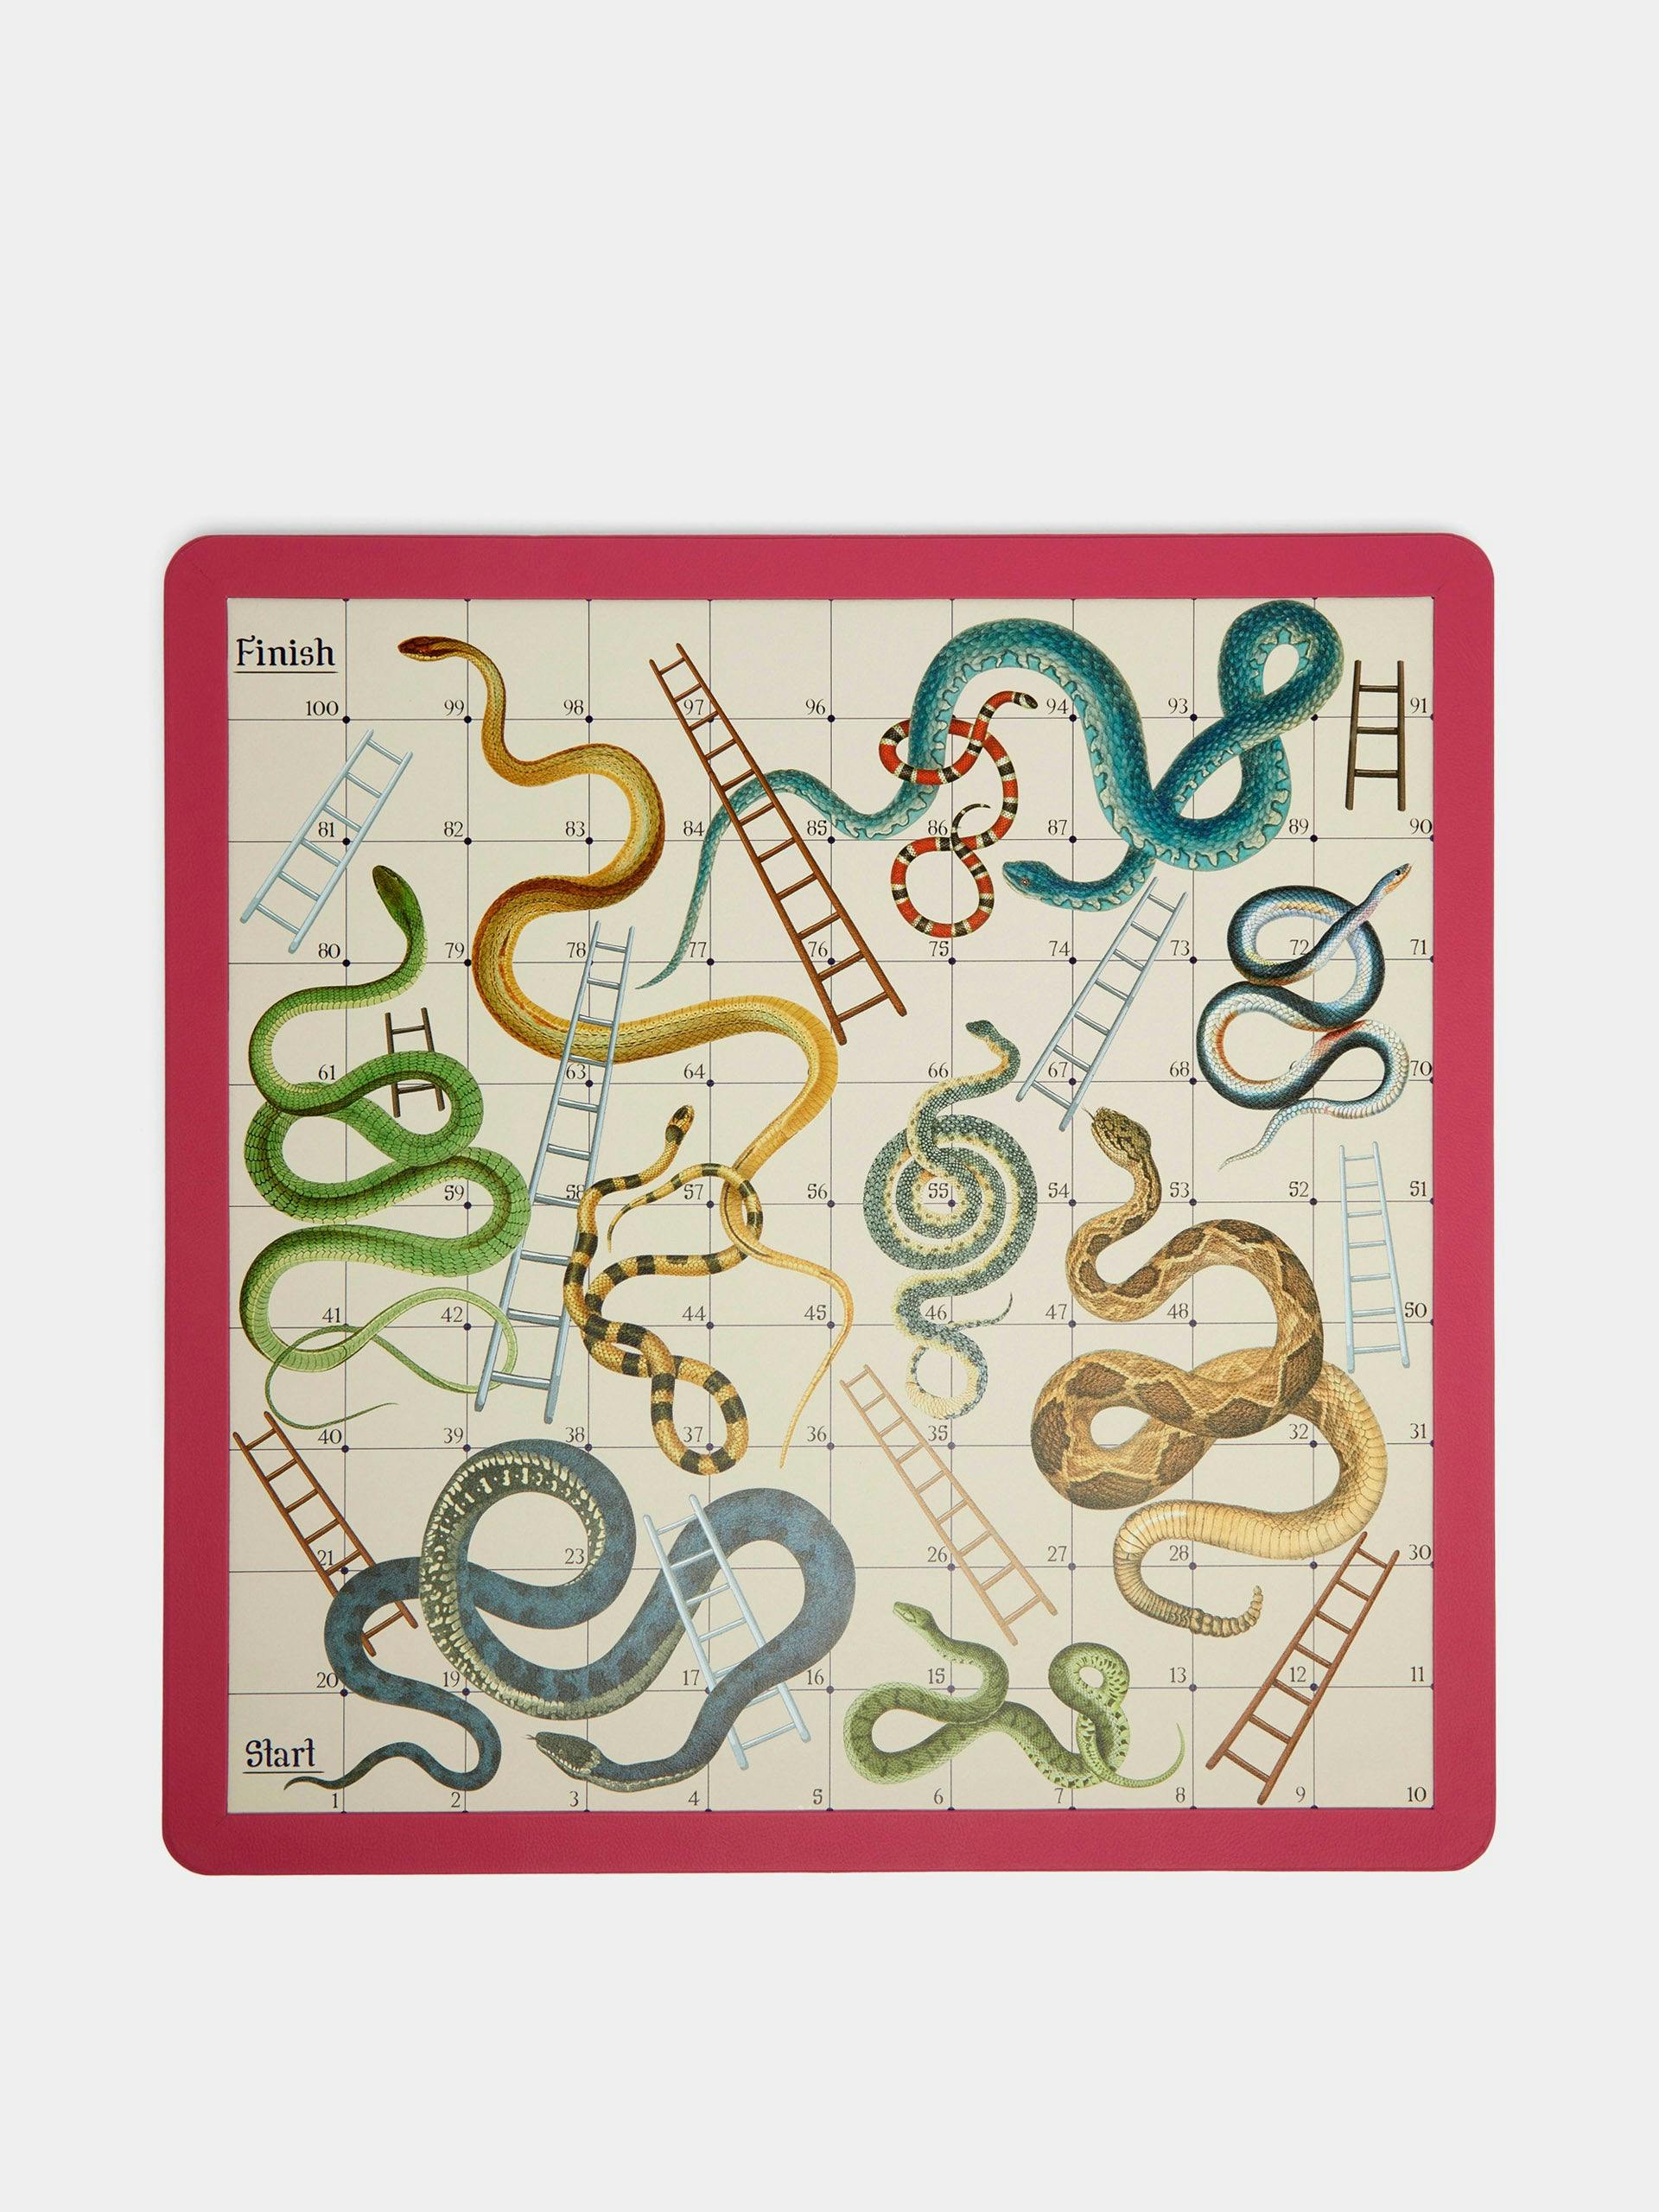 Snakes & ladders and ludo games compendium